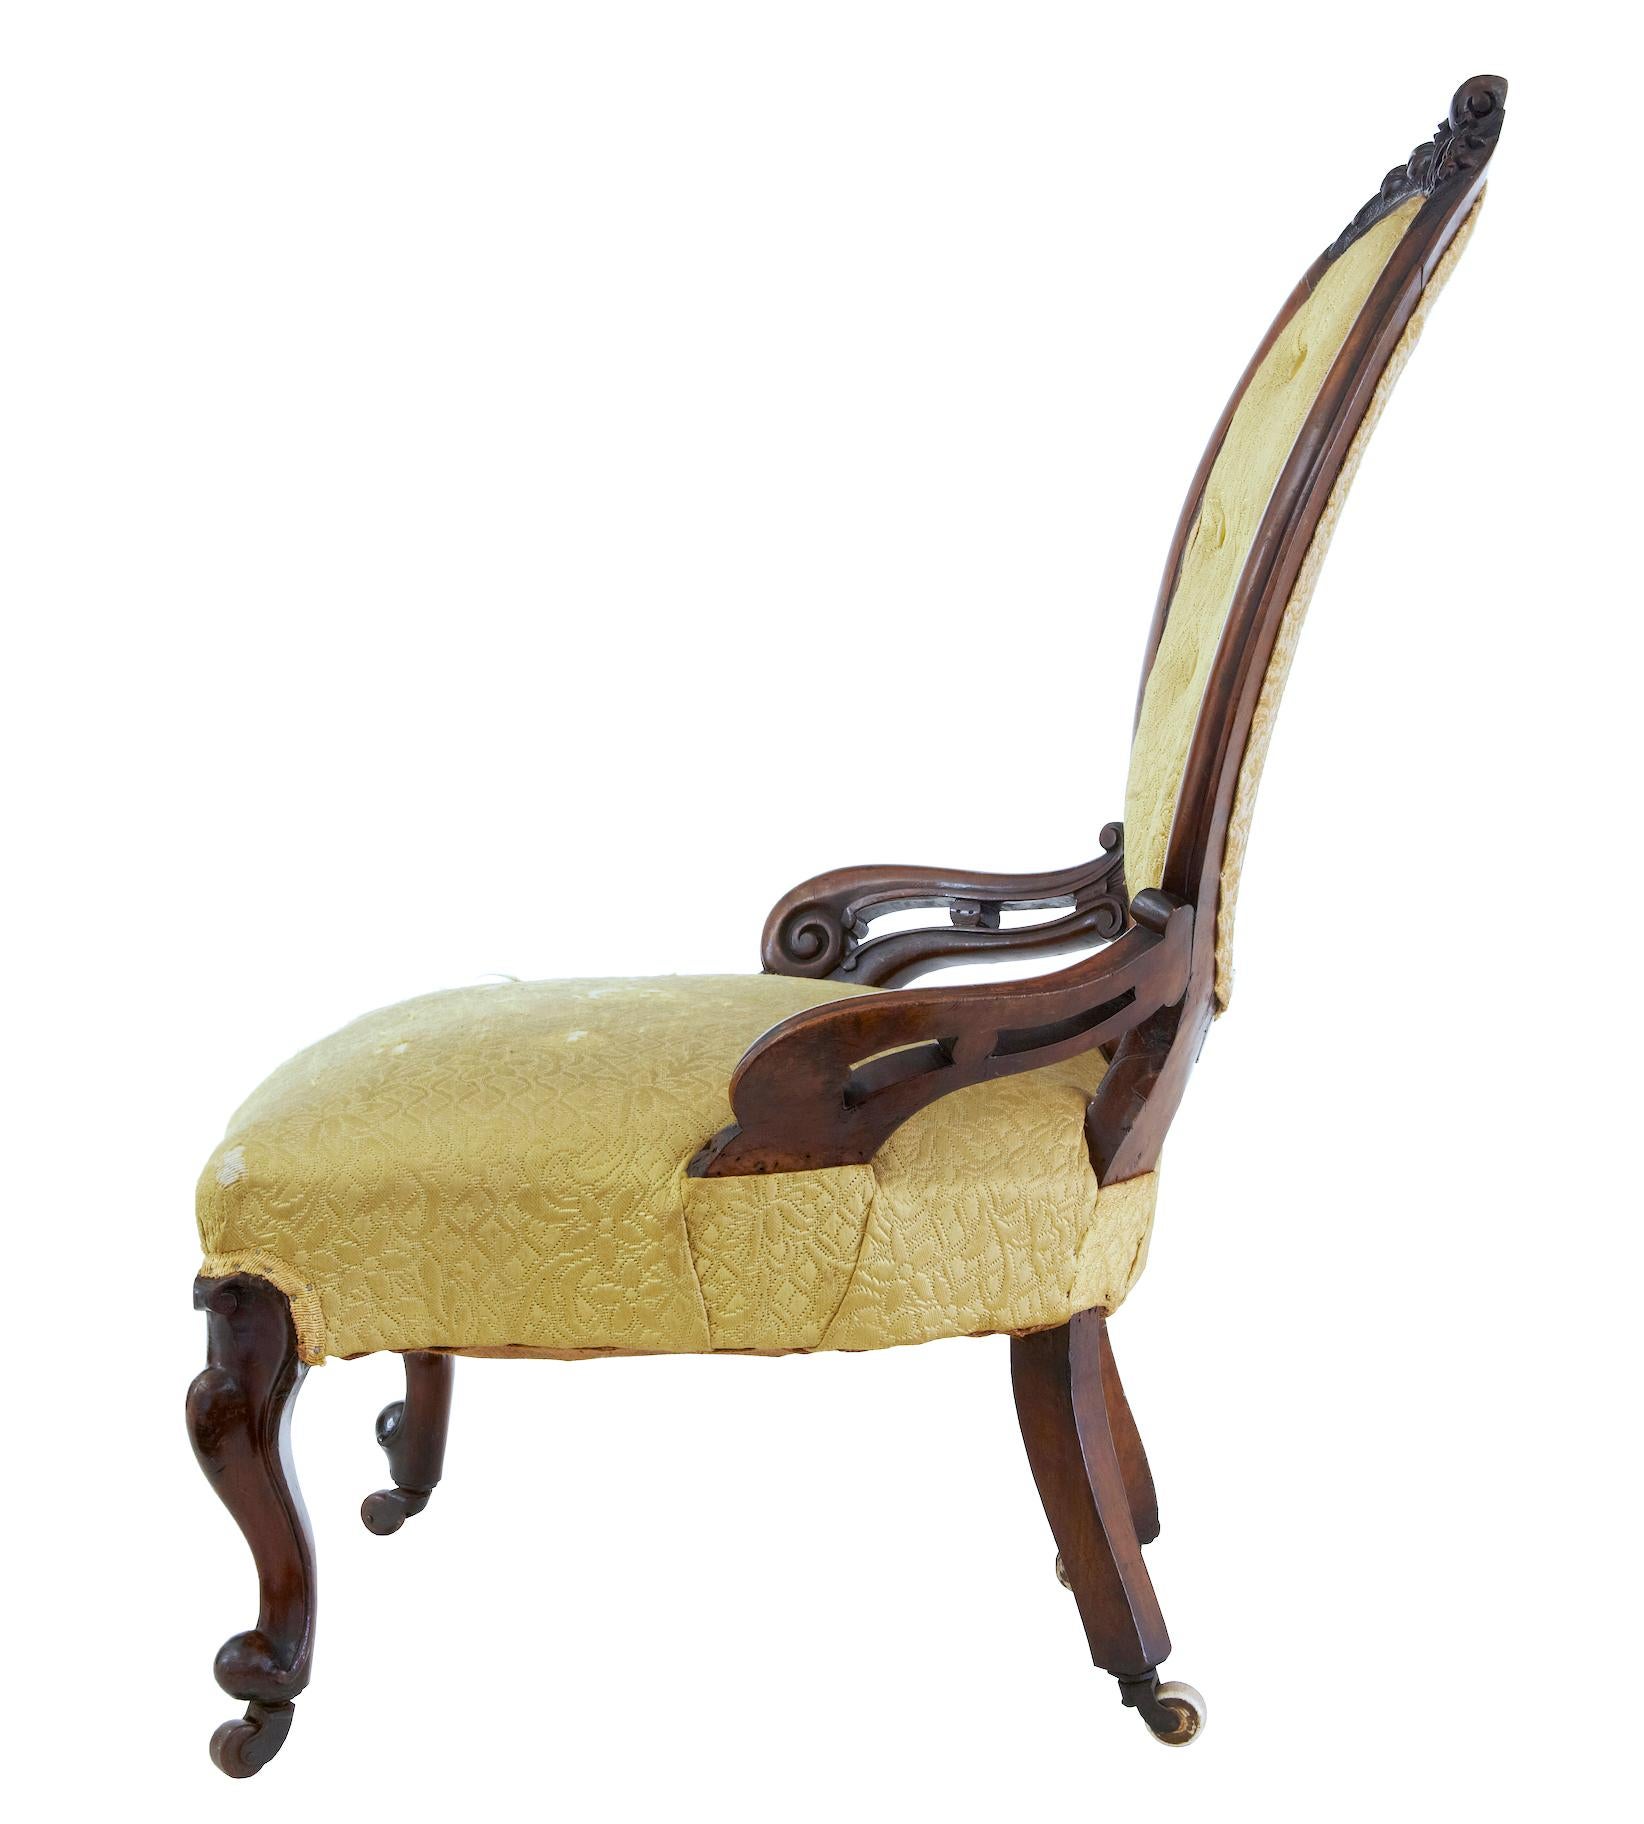 Early Victorian mahogany salon nursing chair circa 1850.

Carved button back back rest with show frame arms. Standing on front cabriole legs and tapering legs to the rear. Finished with original brass castors.

Good colour and patina. Expected